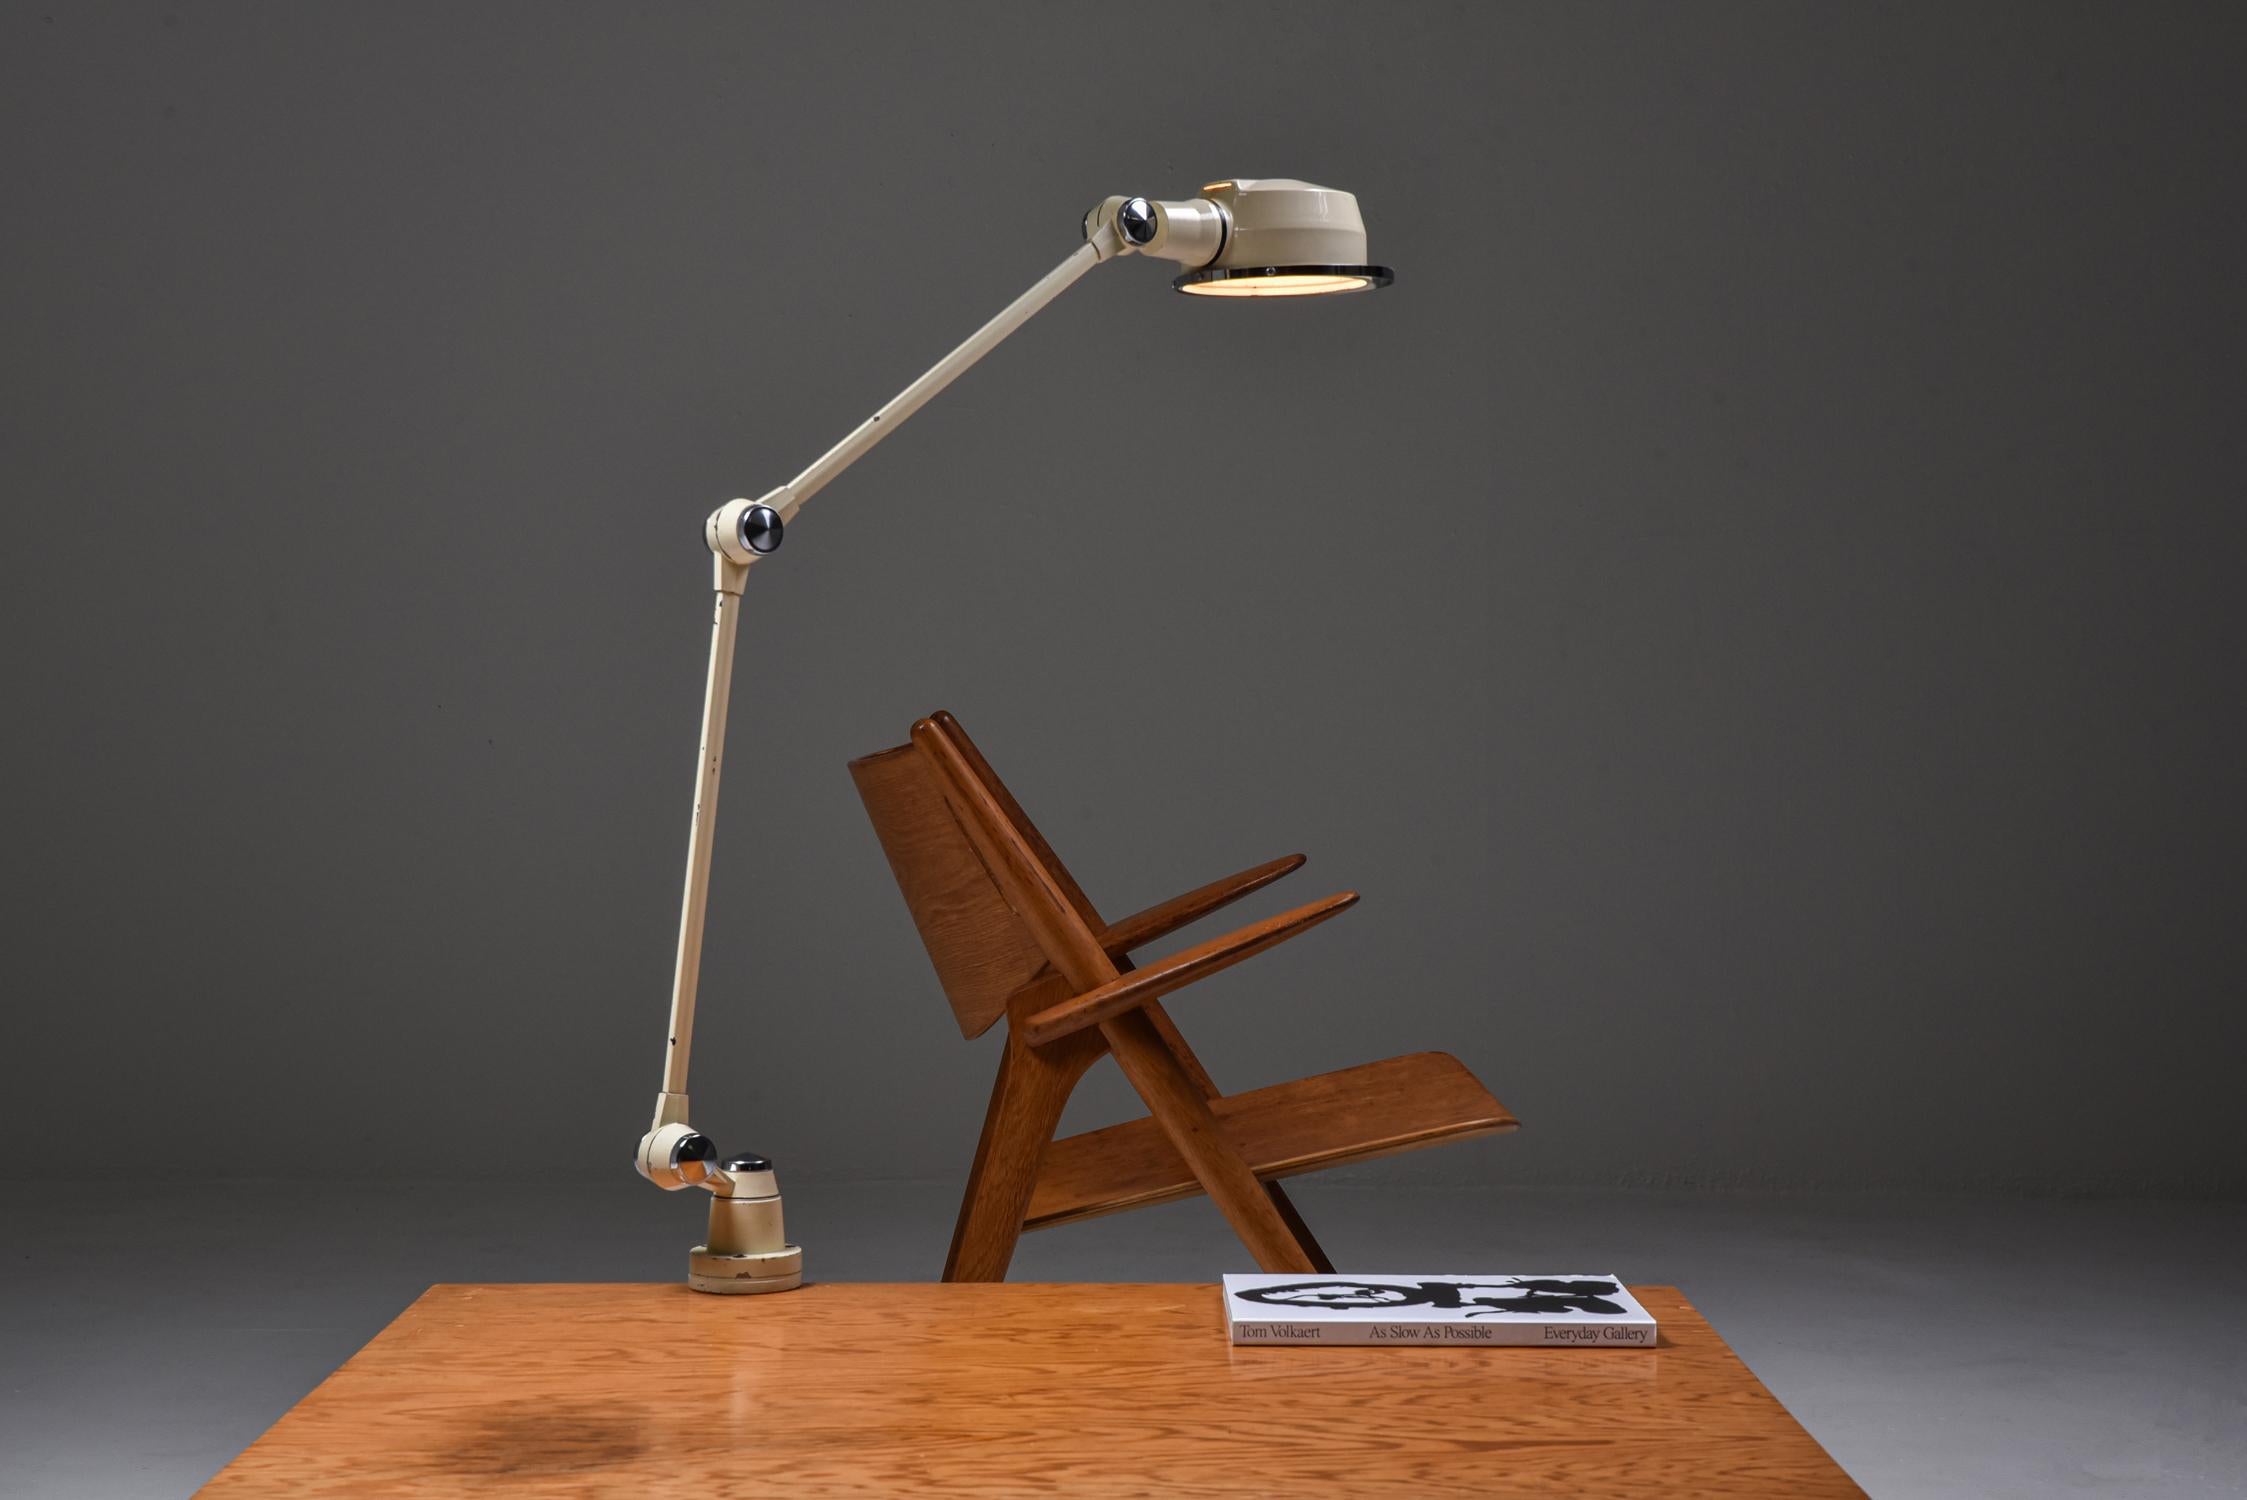 industrial desk lamp, adjustable, jieldé, France, 1930s

From the era of the 'Lampe Gras', this unfamiliar yieldé lamp is a great add to a rustic modern, minimalist and zen inspired decor

We have 6 lamps available.
 